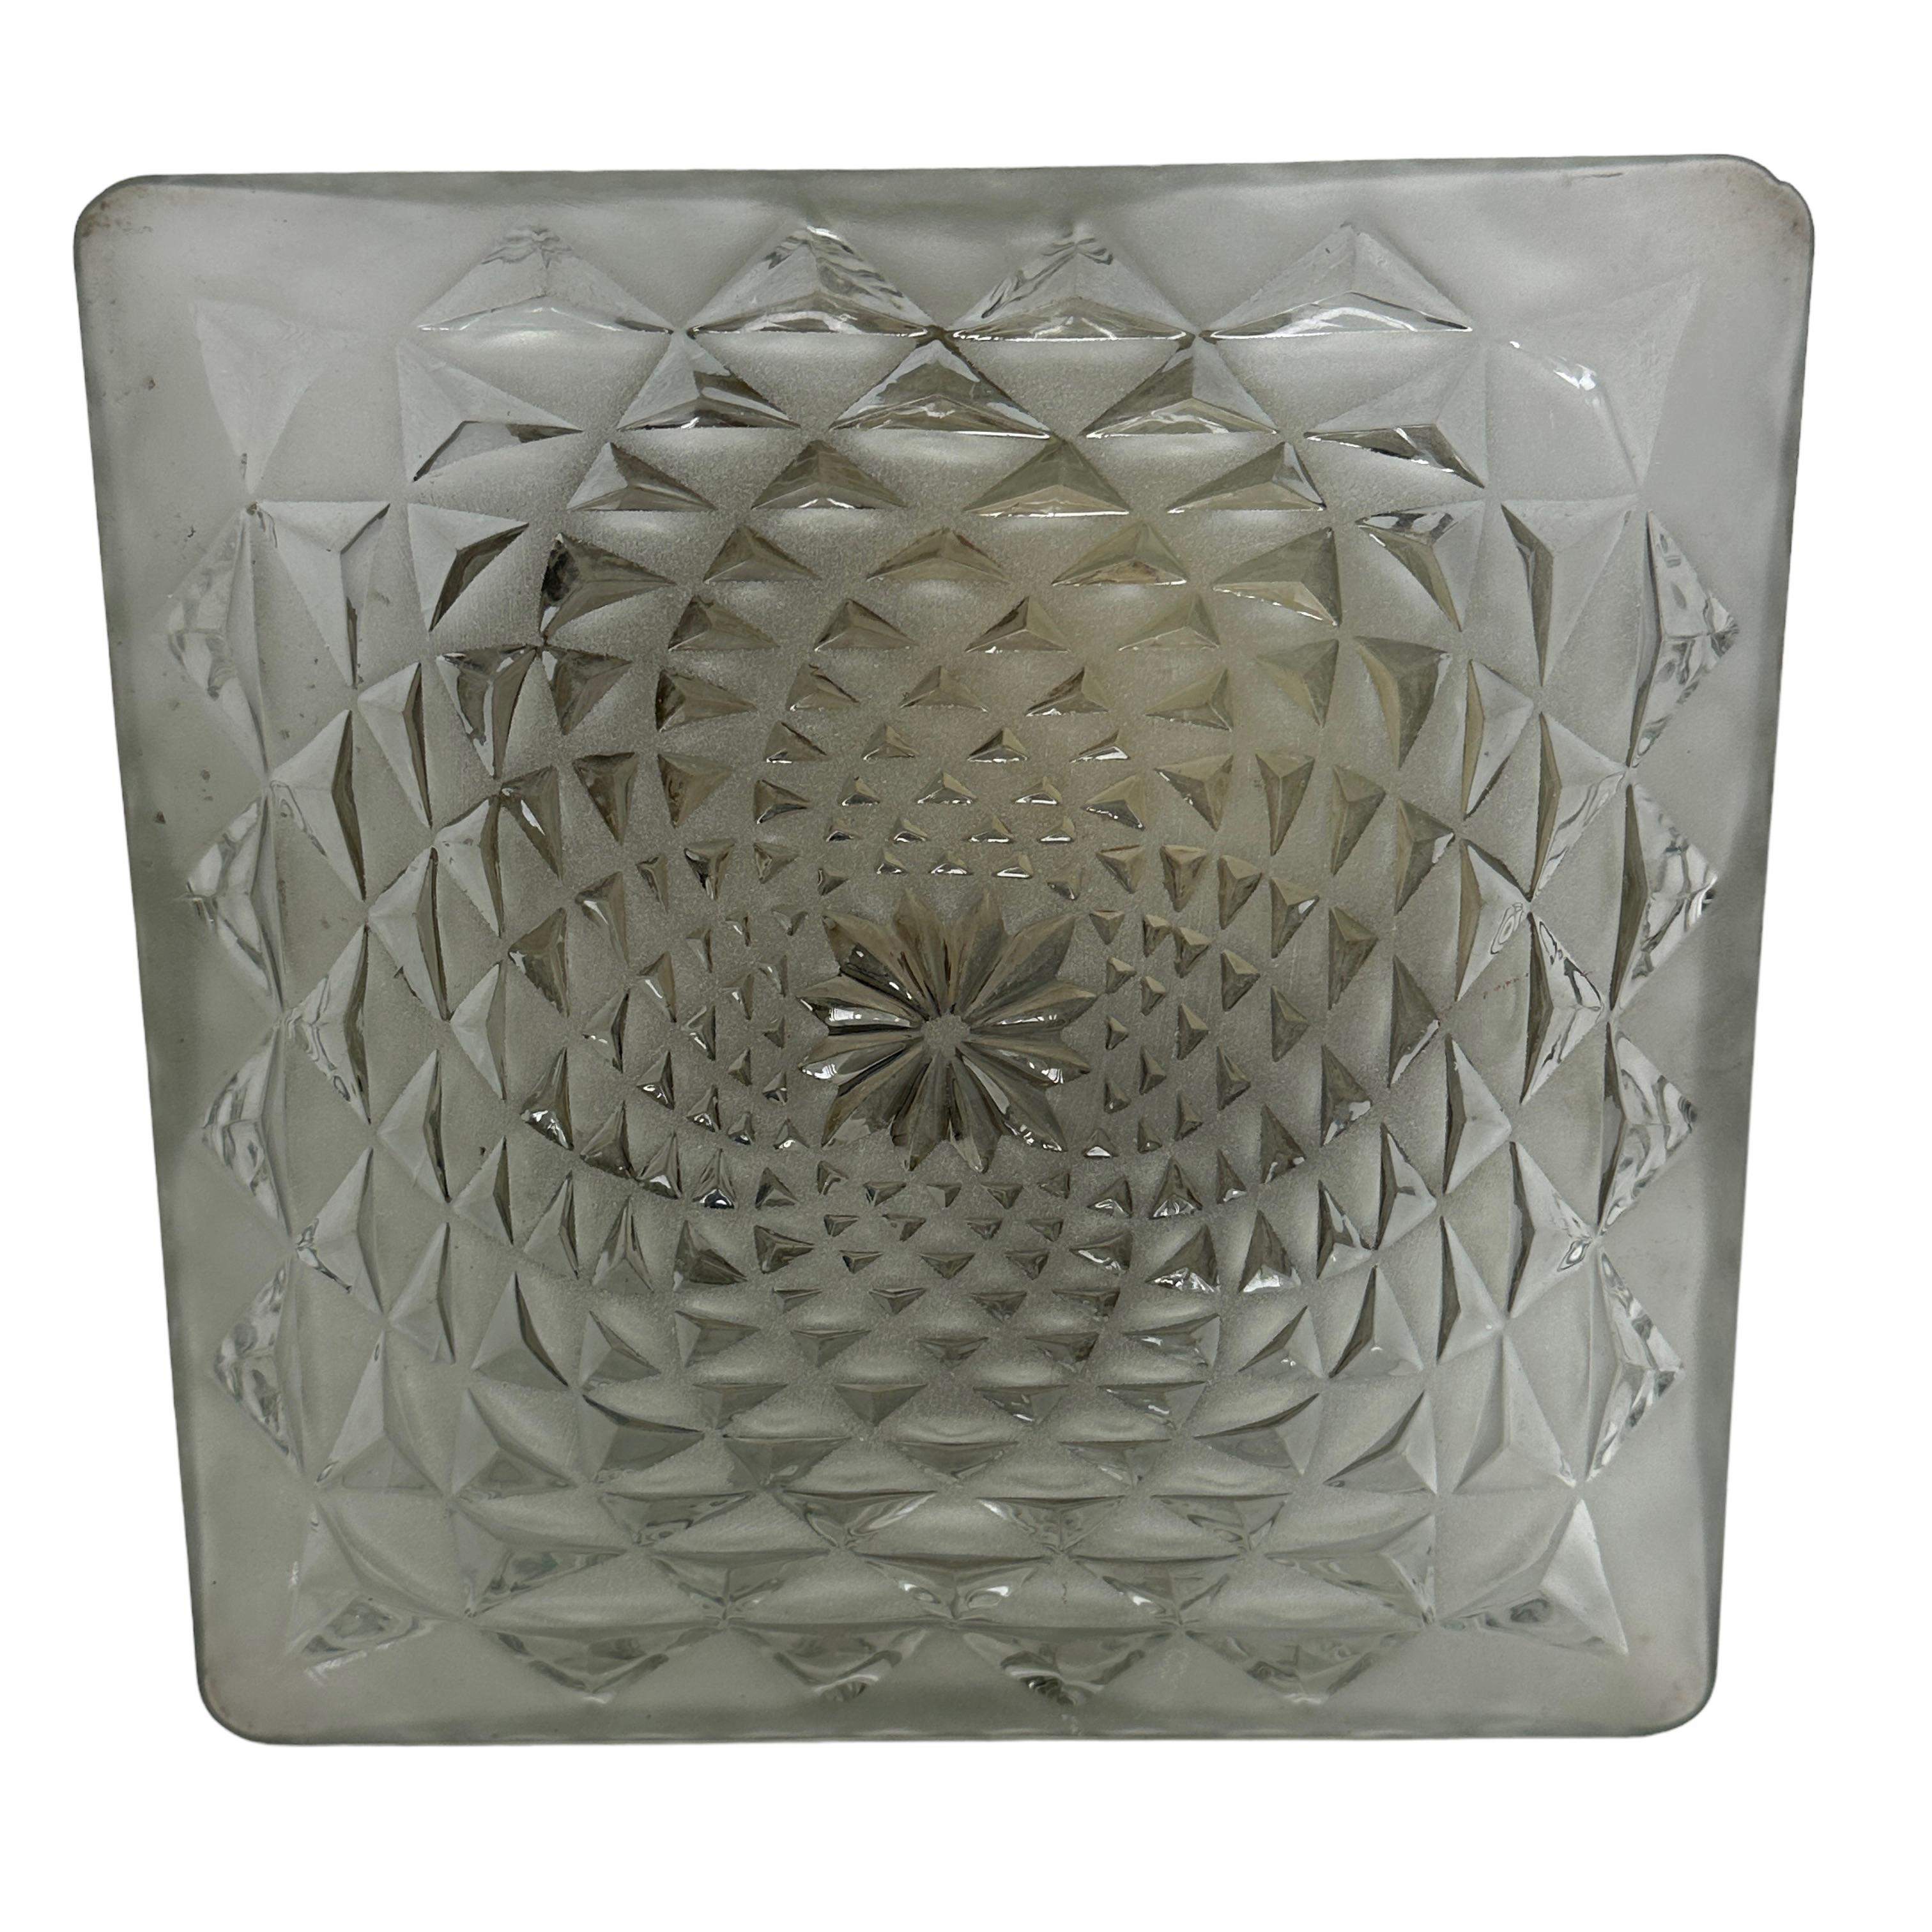 A beautiful flush mount by Honsel Leuchten, Germany. The glass is clear and features a star pattern with a frosted finish. The light is in very good, used condition and would make a great addition to any home. The fixture requires two European E27